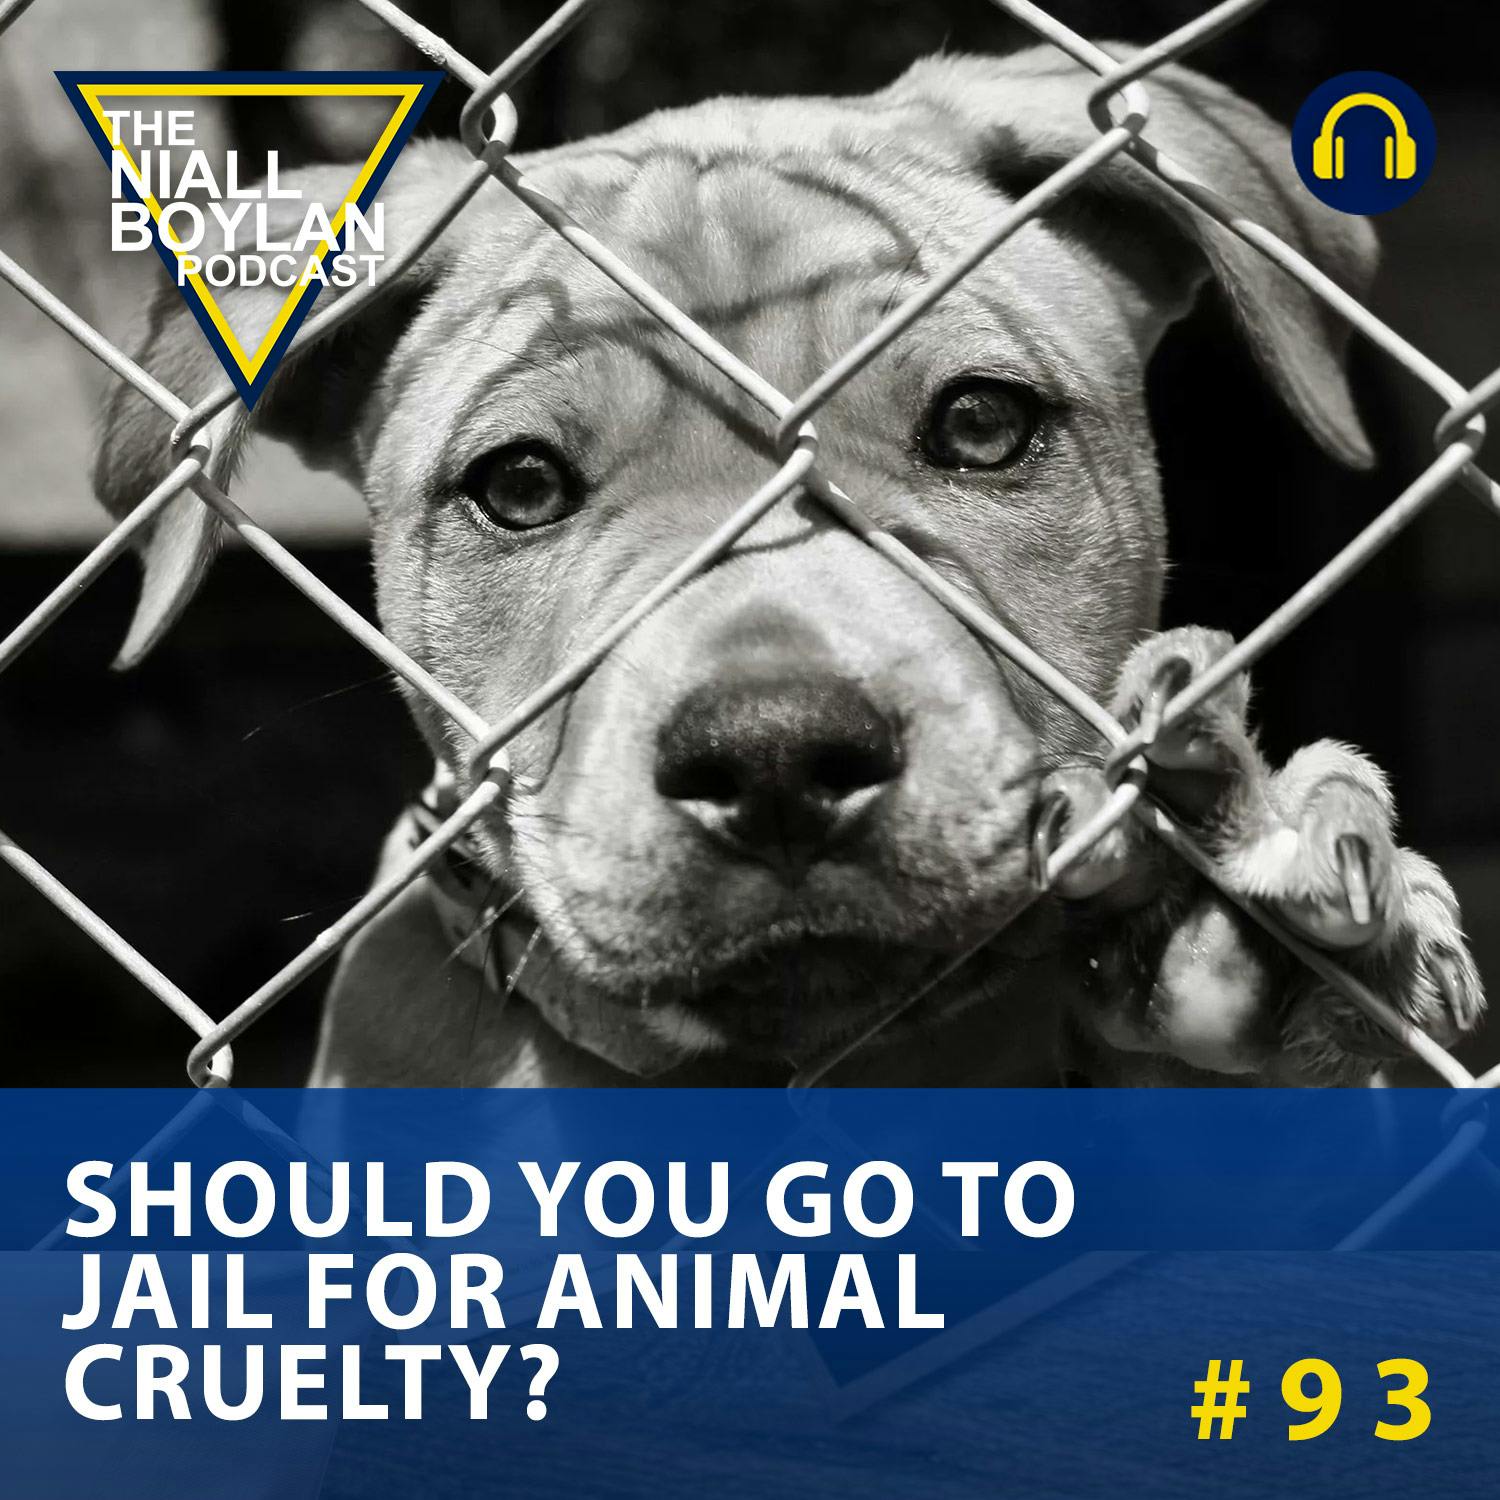 #93 Should You Go To Jail For Animal Cruelty?